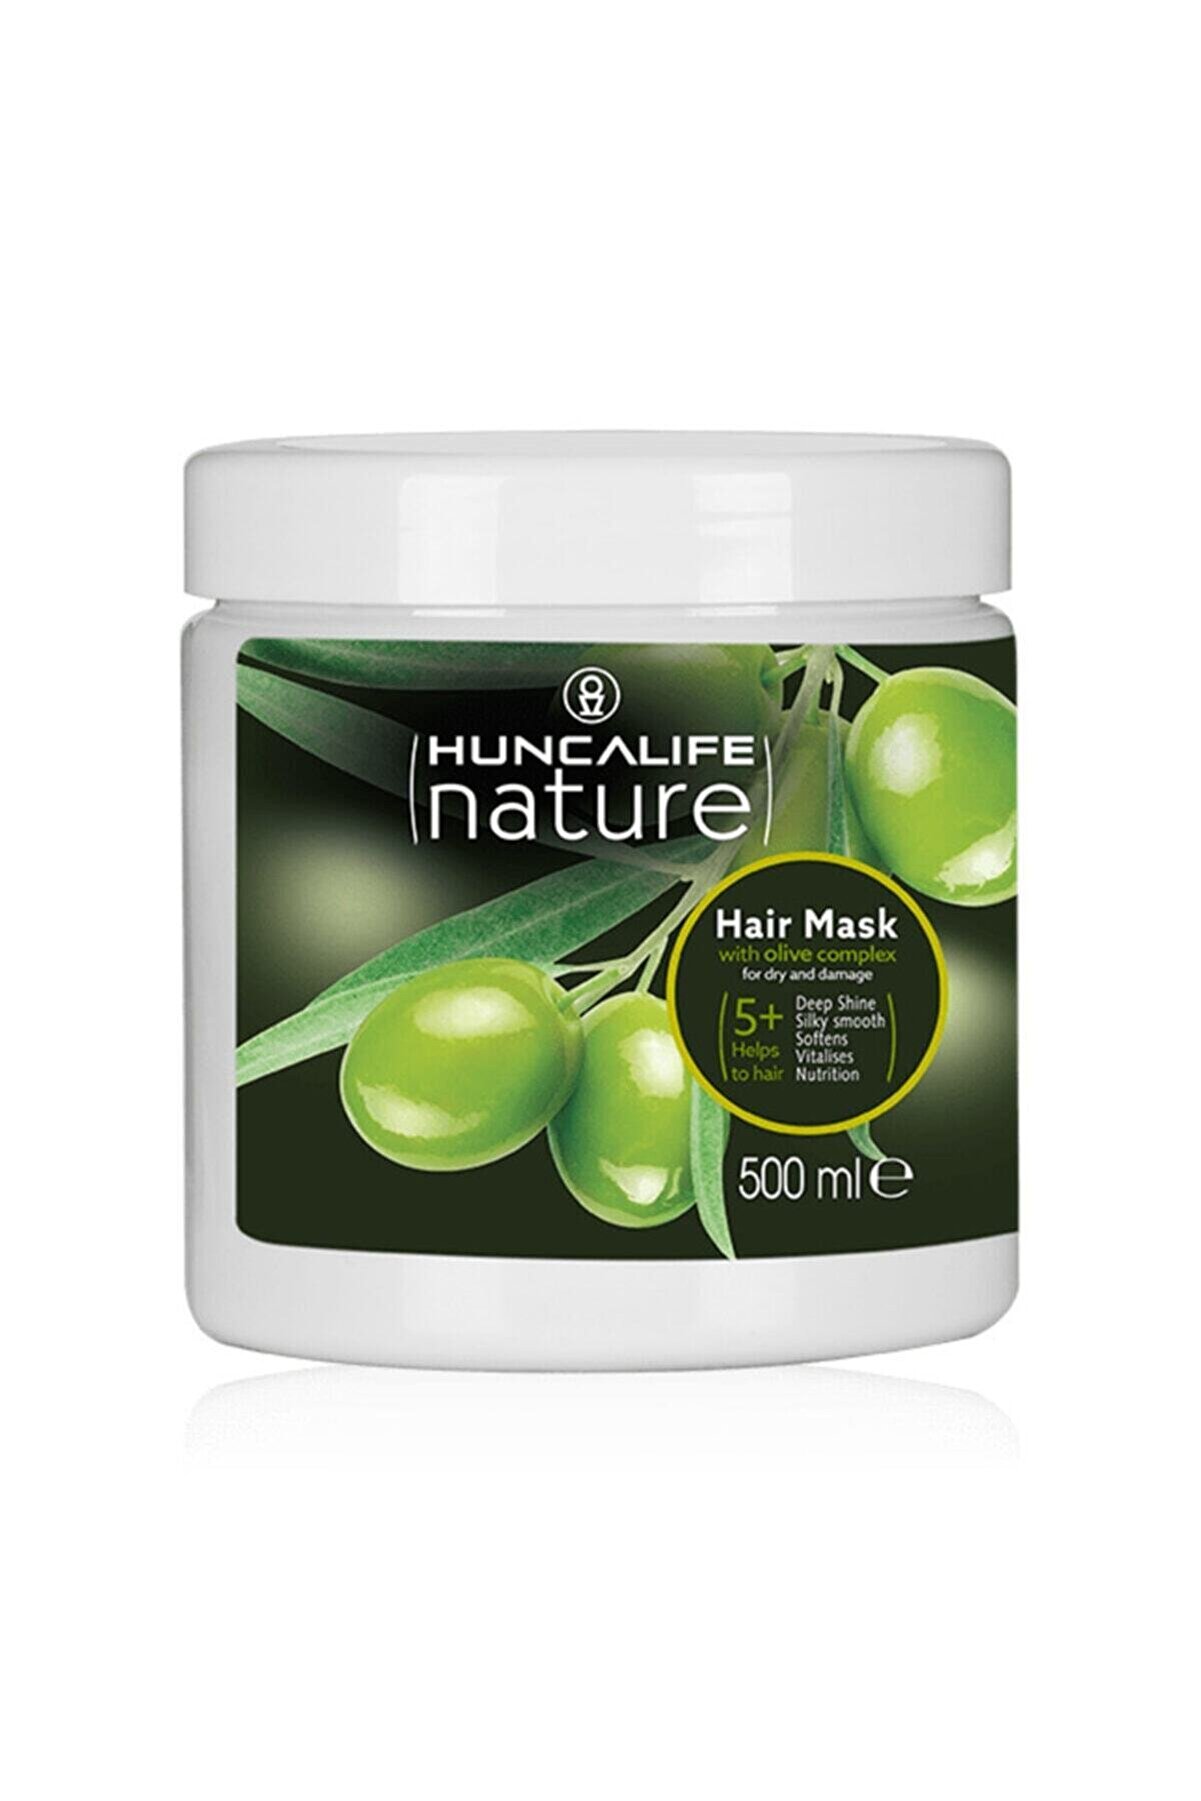 Huncalife Nature Hair Mask With Olive Complex